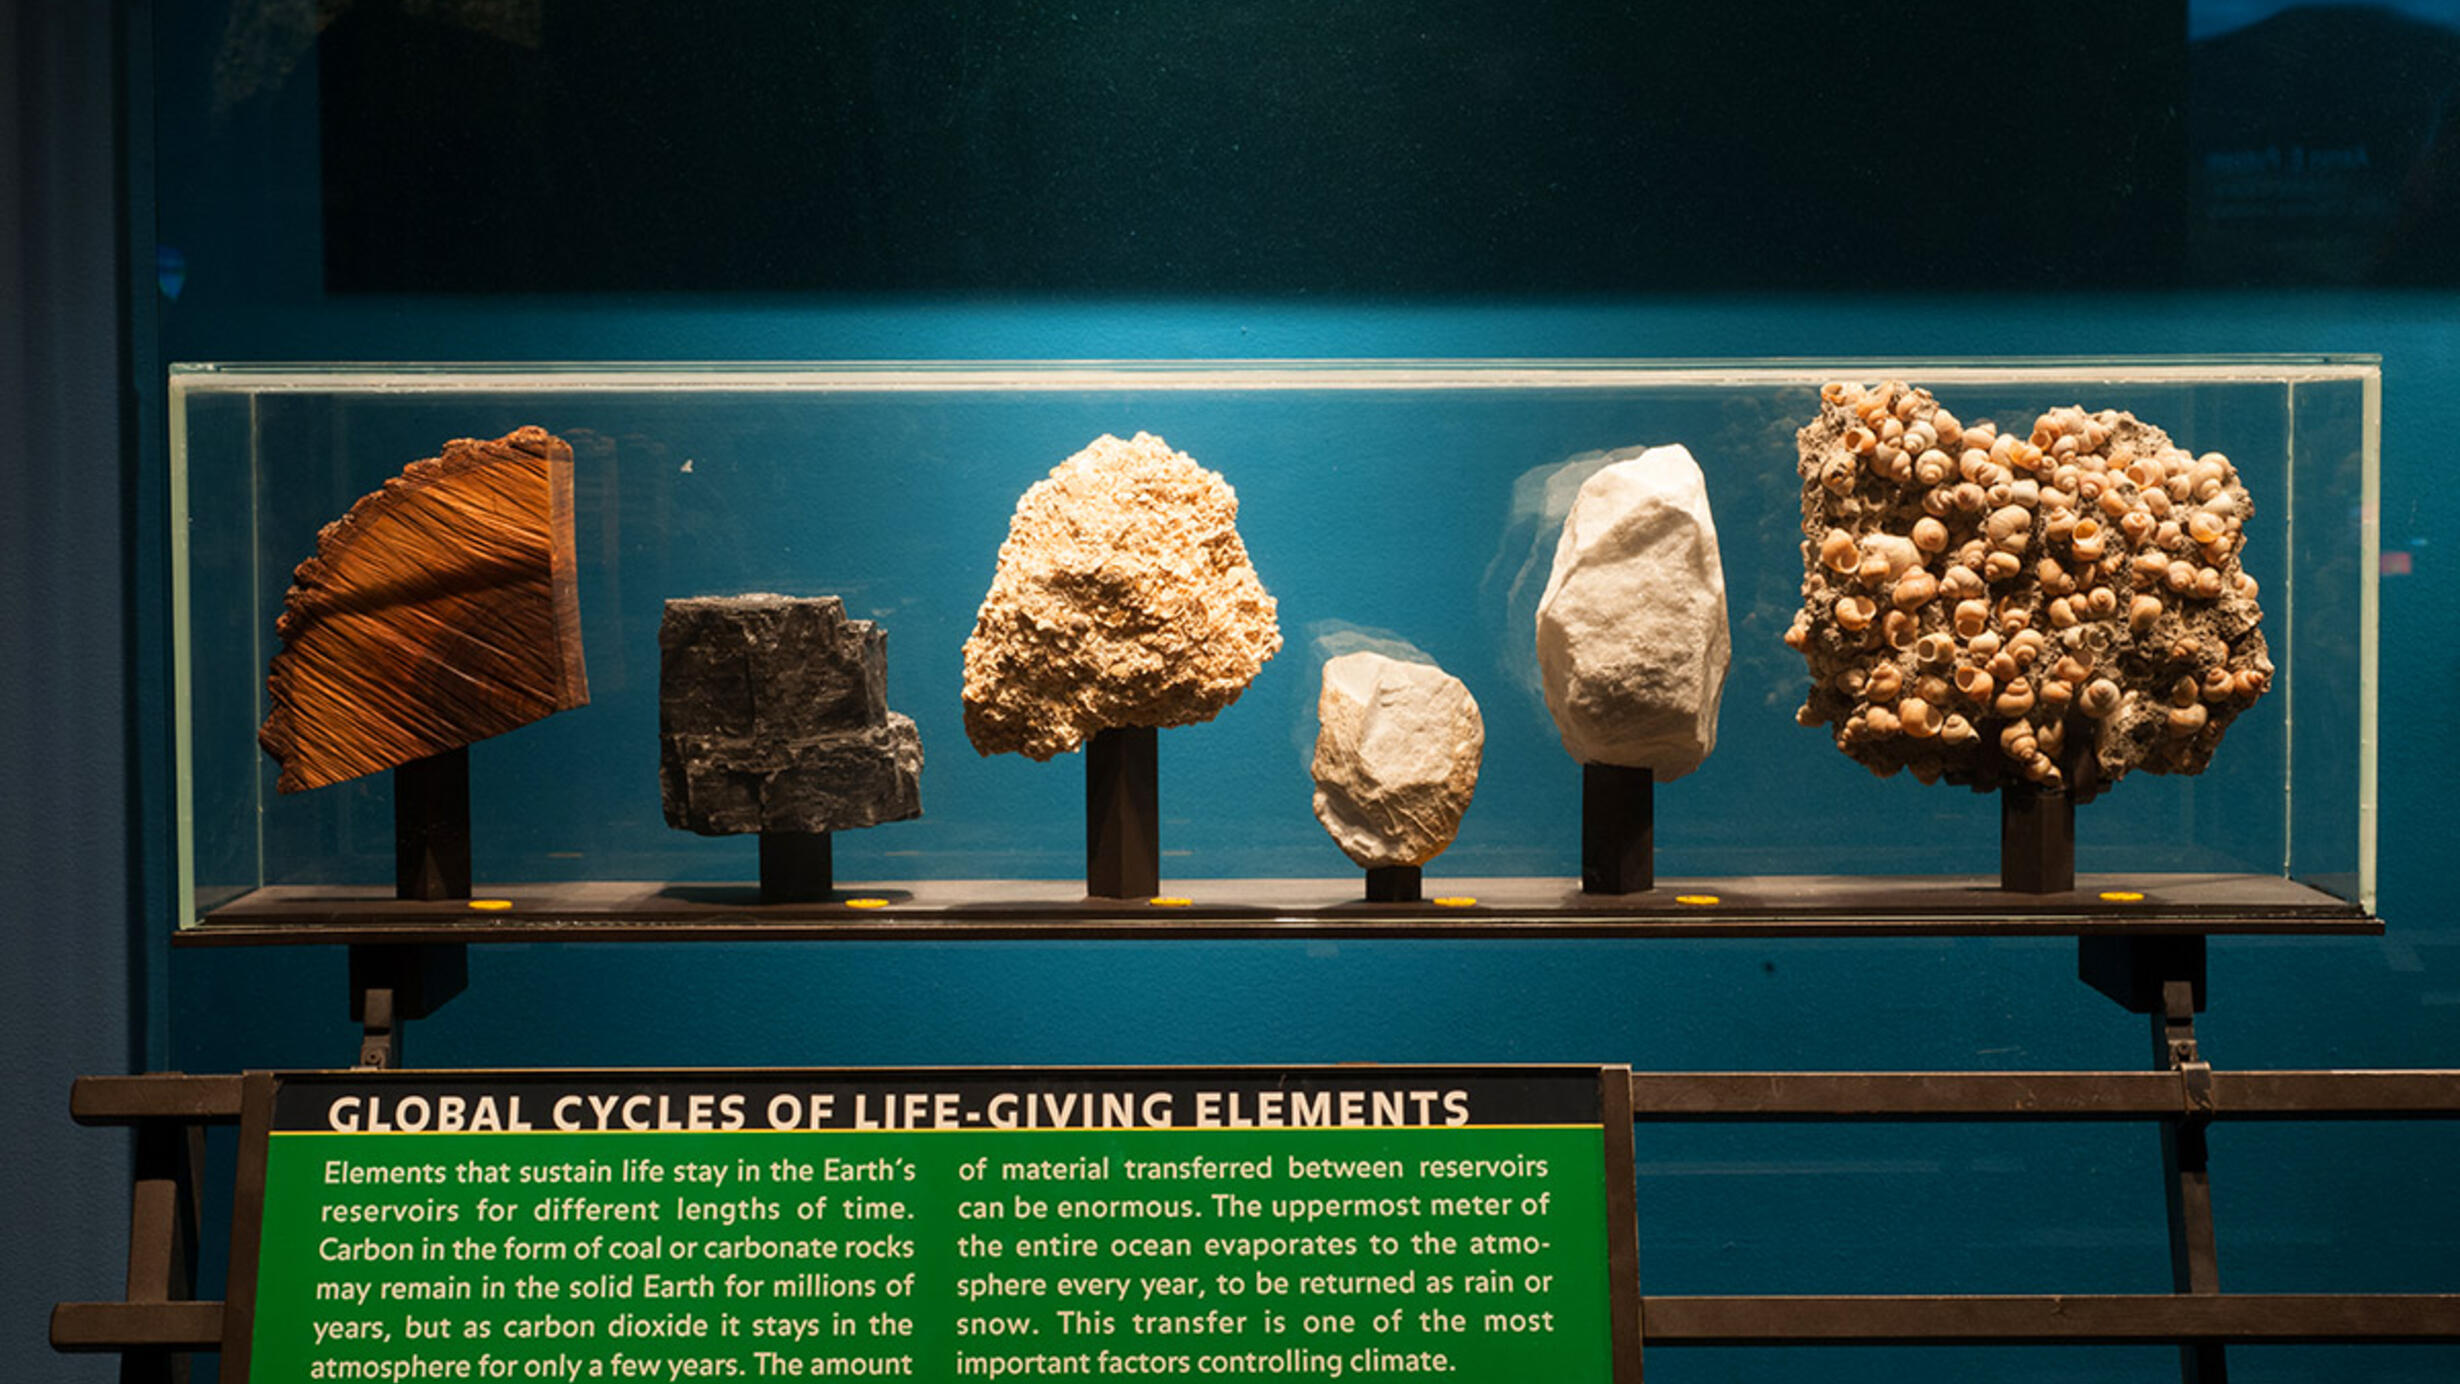 Global Cycles of Life-Giving Elements